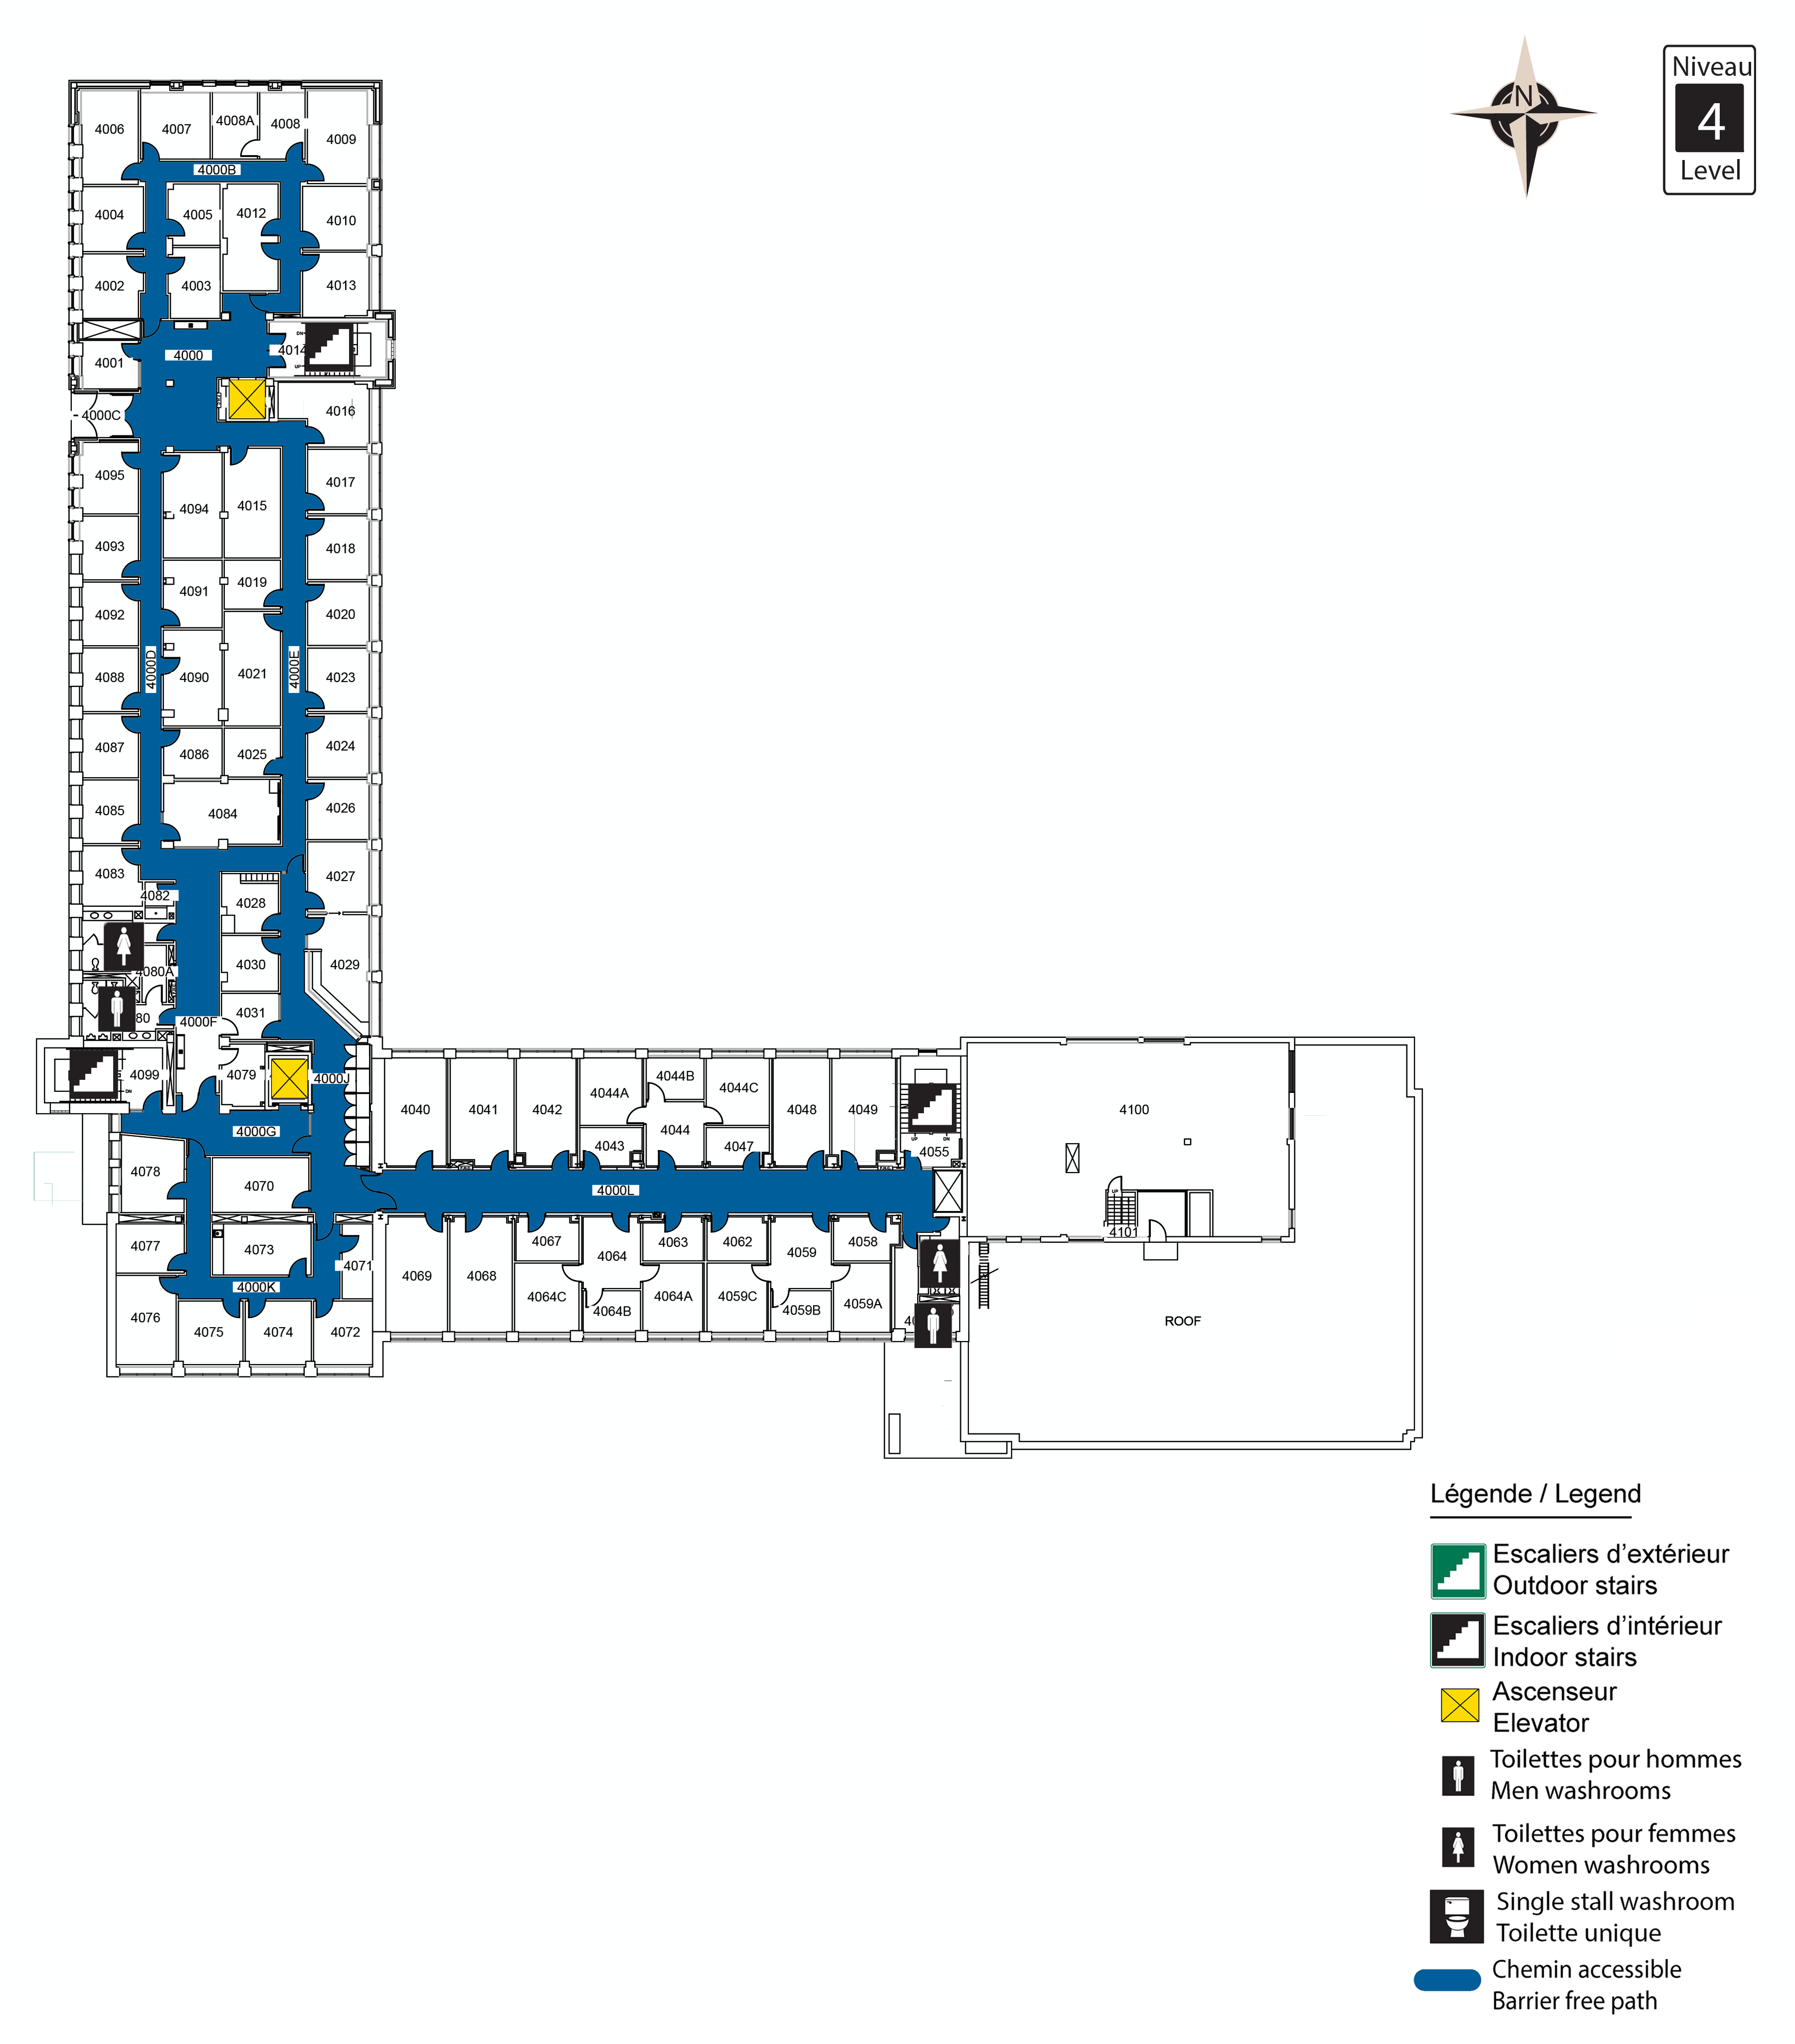 Accessible map of VNR level 4